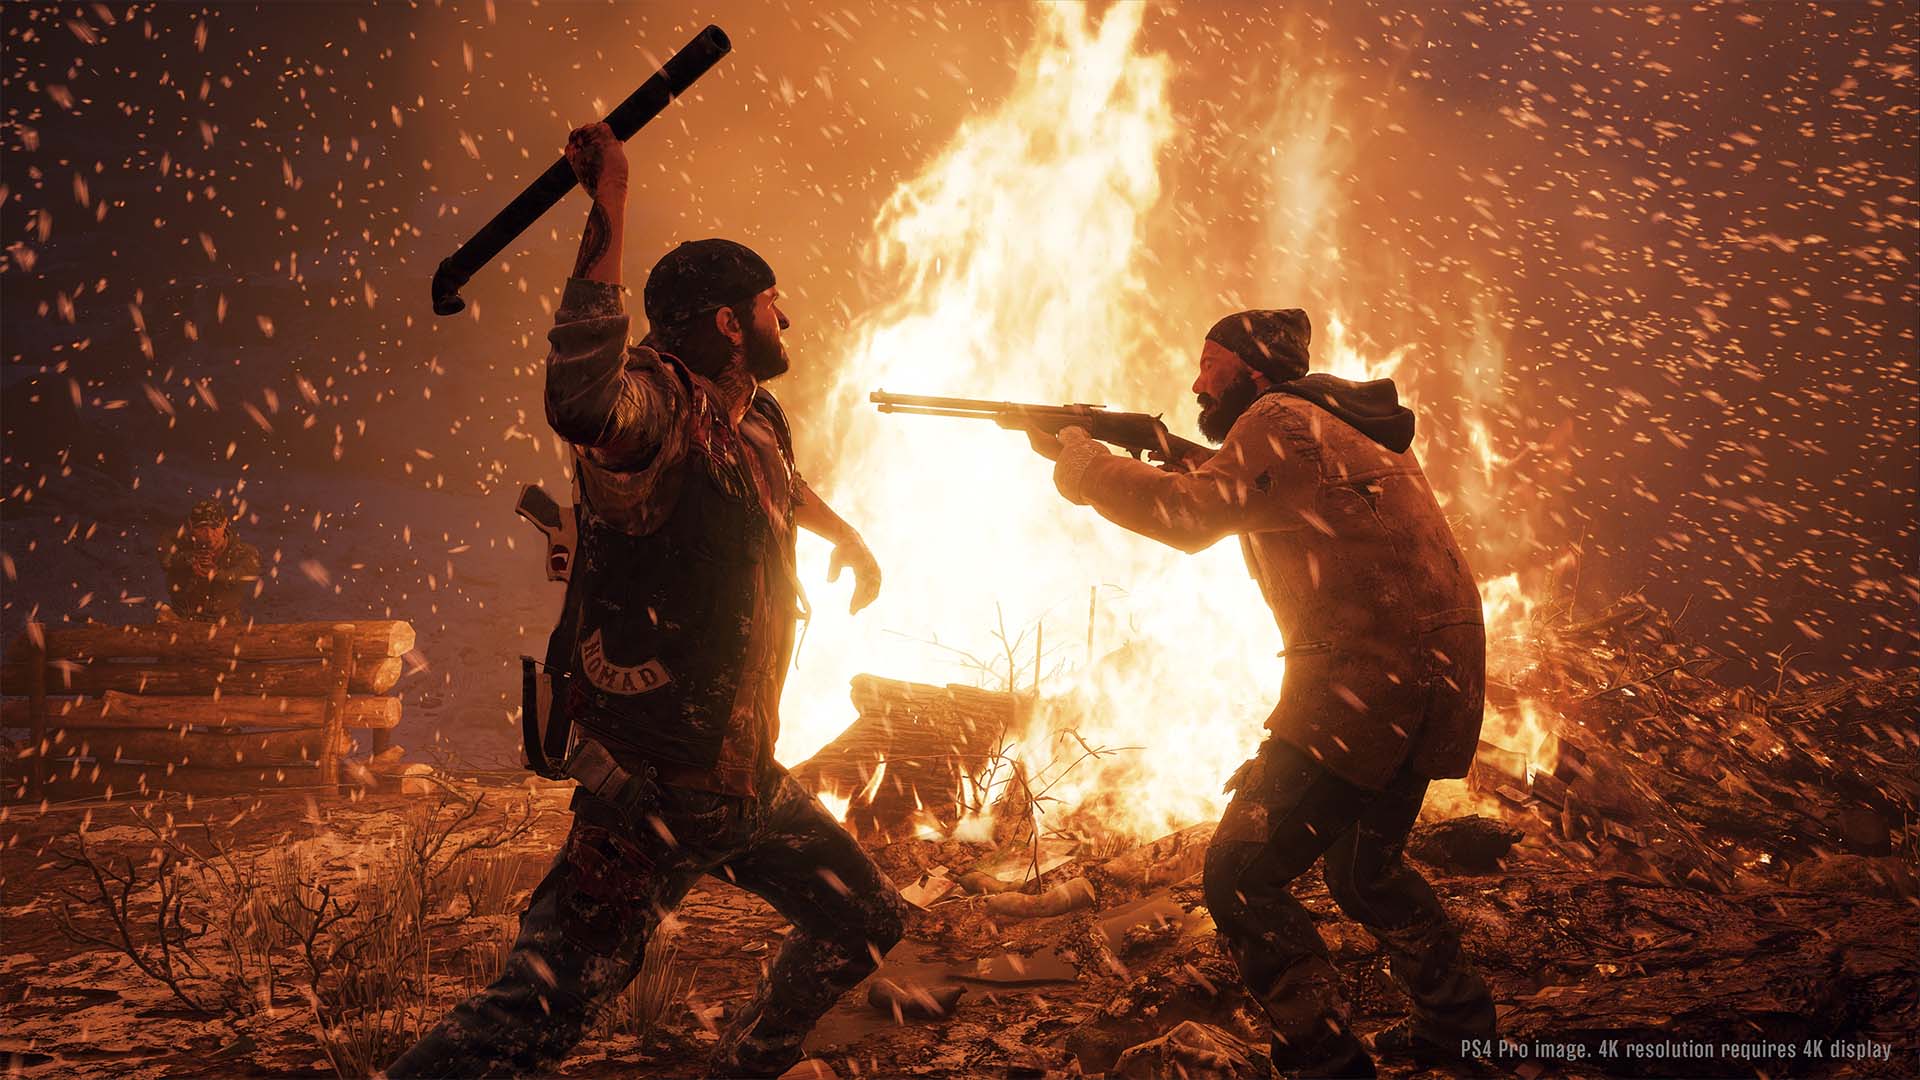 Days Gone Update 1.05 Patch Notes on PC - Full List of Bug Fixes